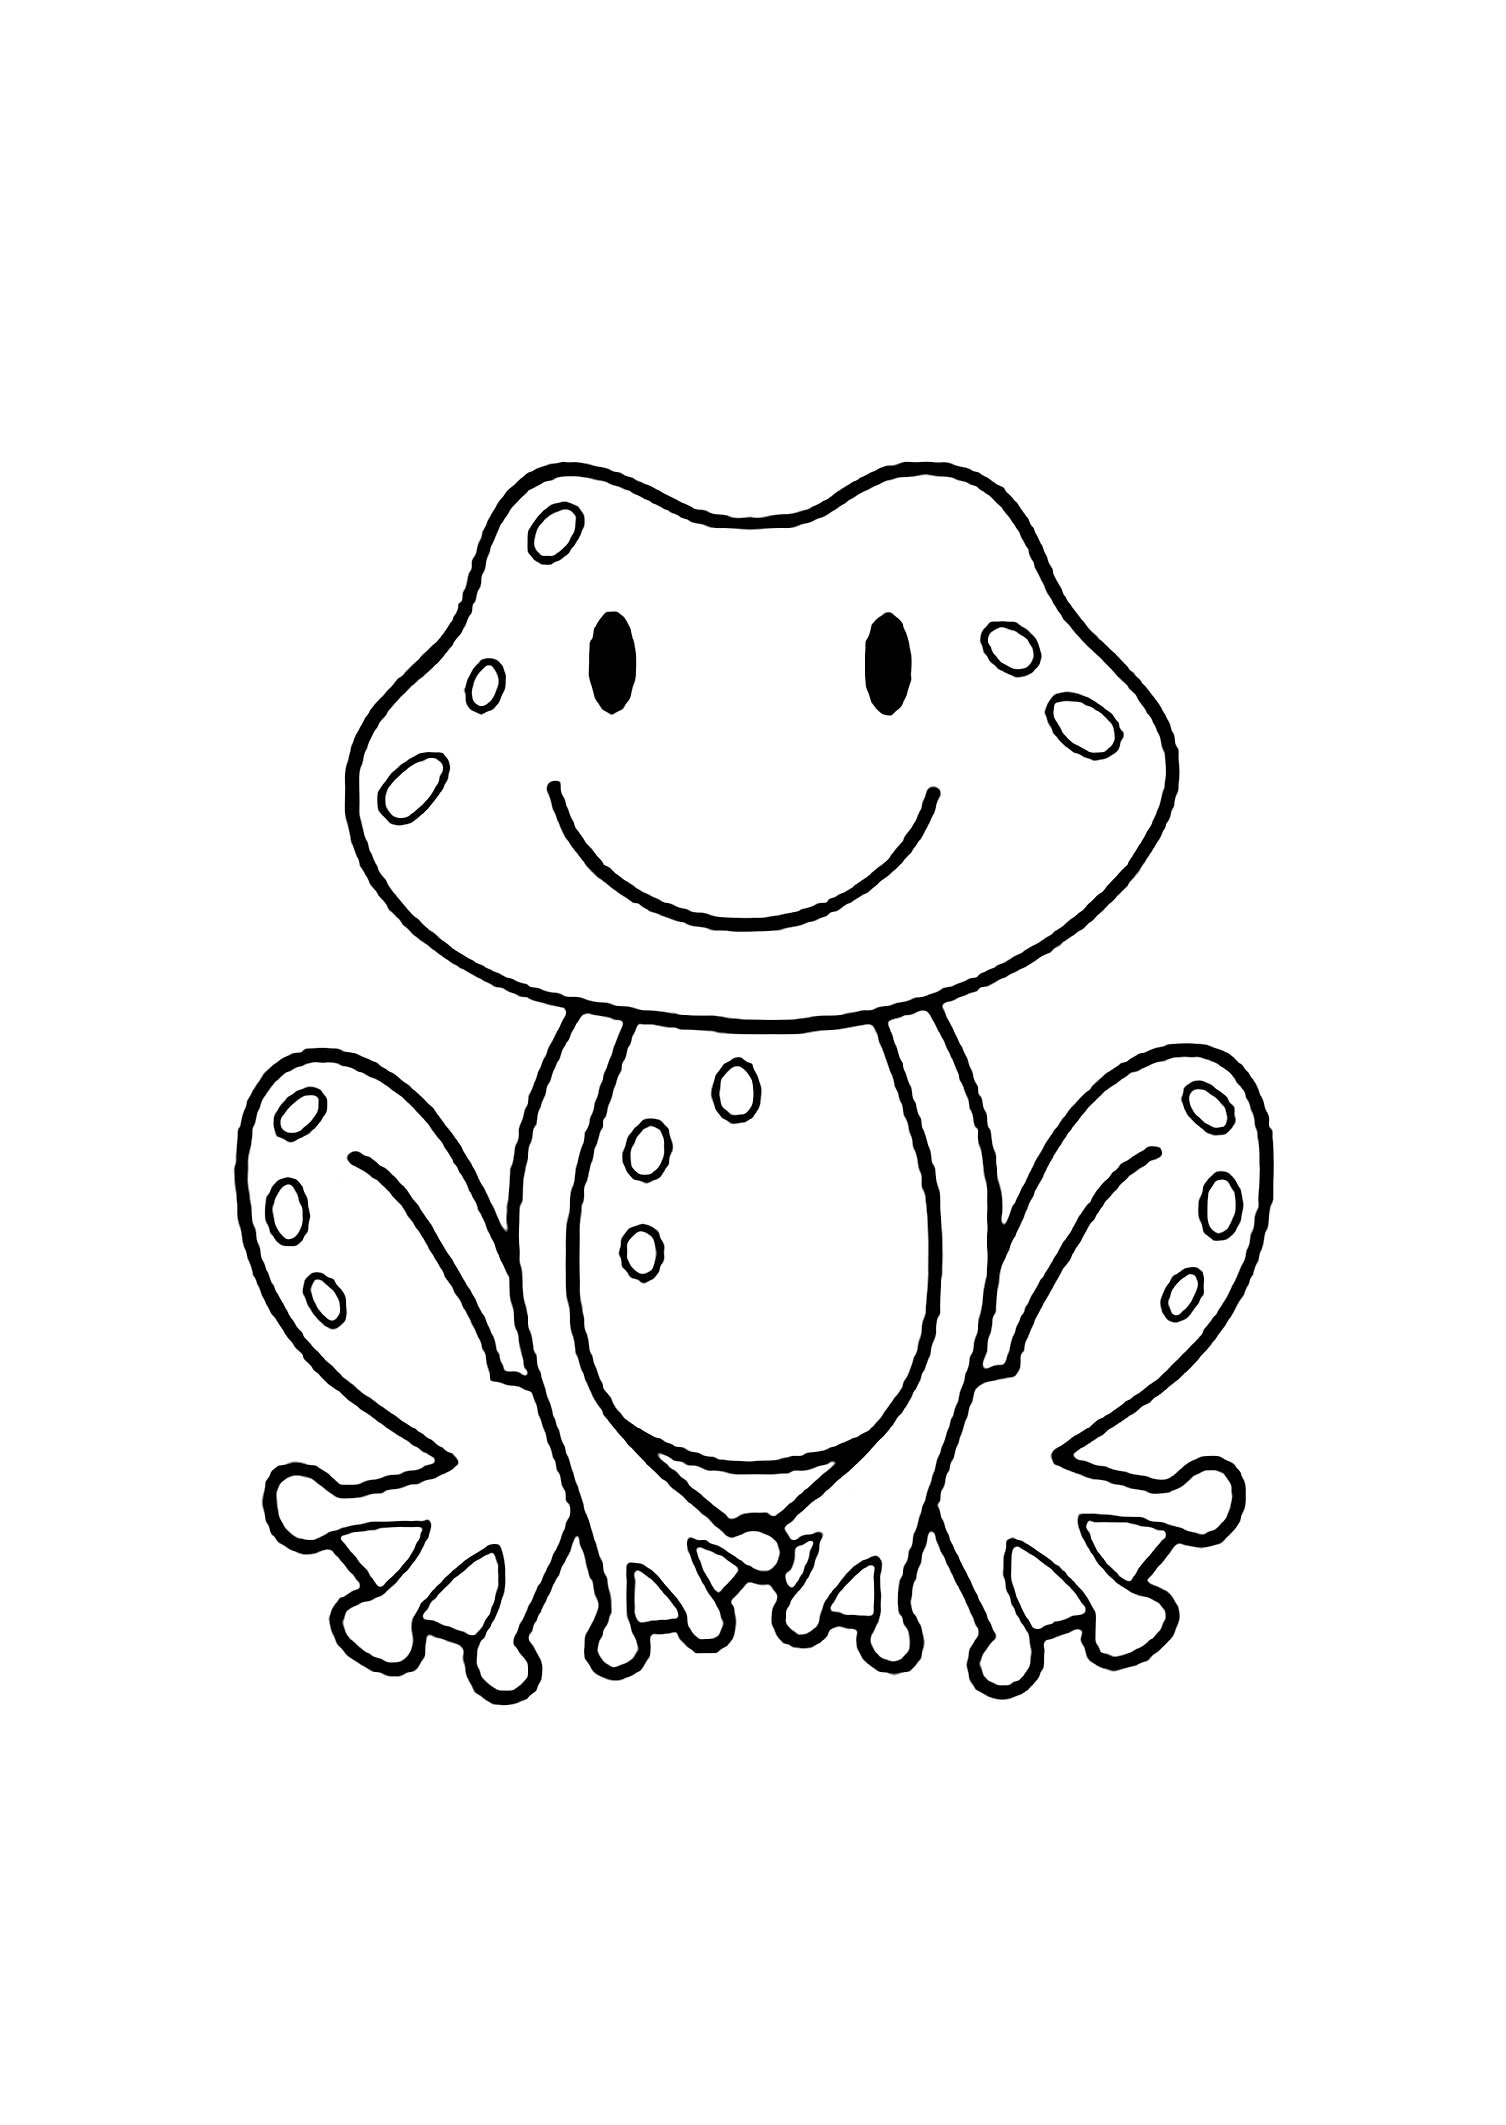 Cute Frog Coloring Pages For Kids